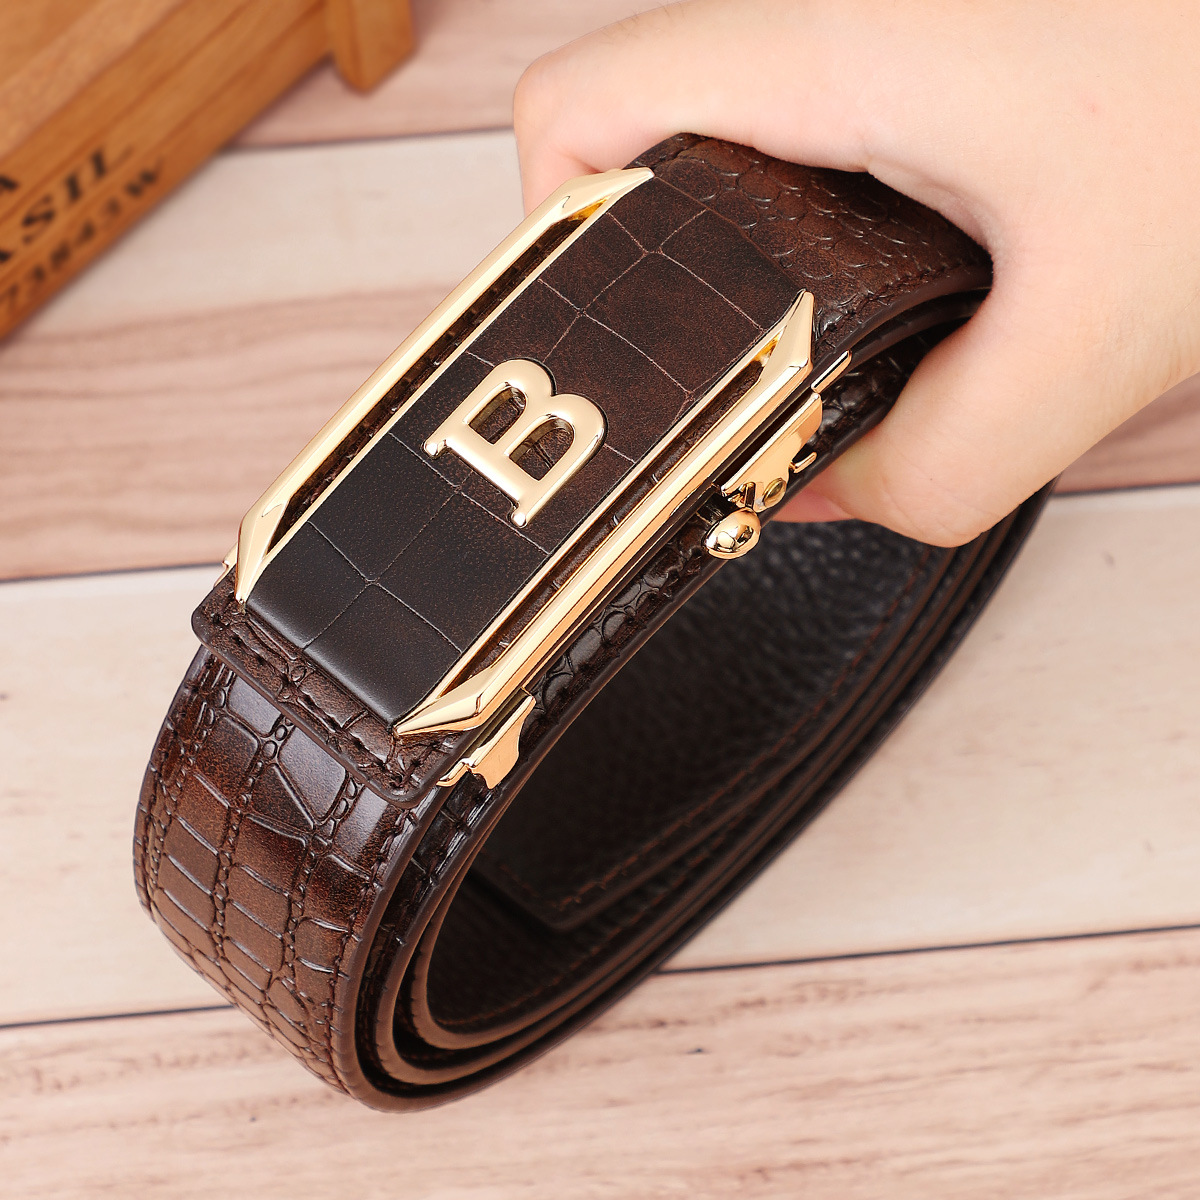 Men's belt new crocodile pattern leather automatic buckle fashion all-match Belt young and middle-aged casual business pants belt fashion - ShopShipShake